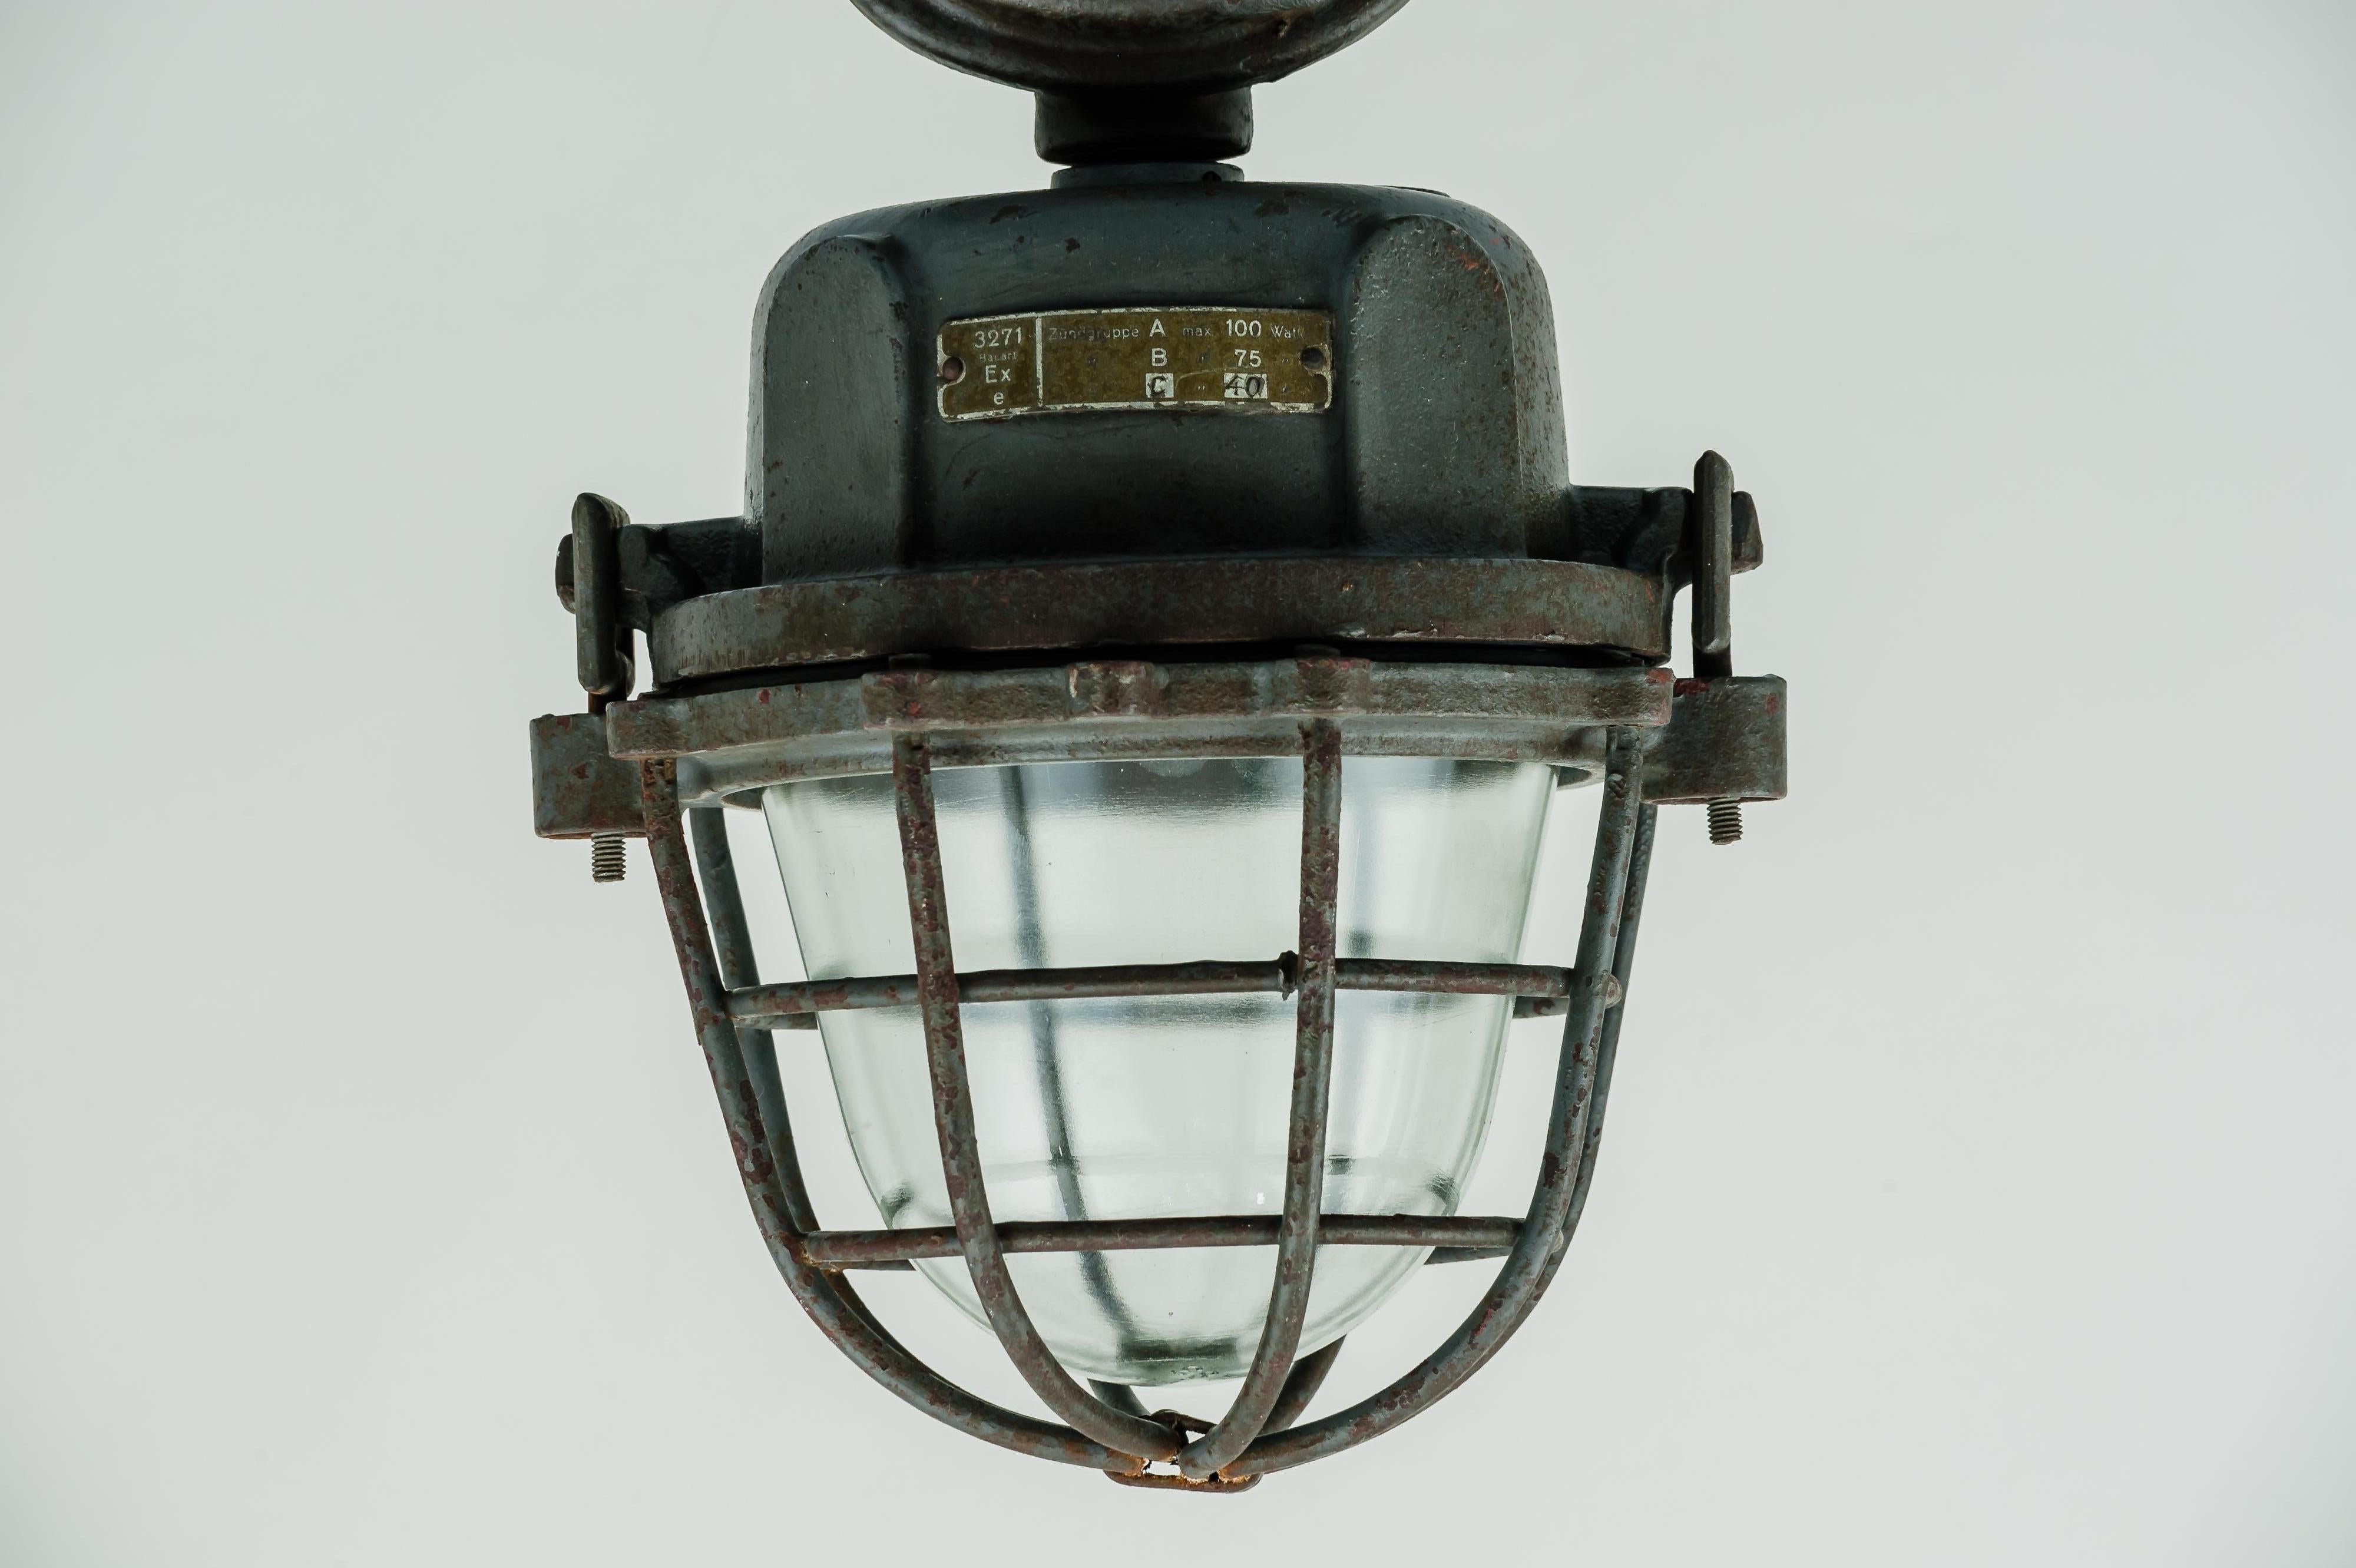 Rotating and heavy industry schaco lamp, 1930s
Original condition